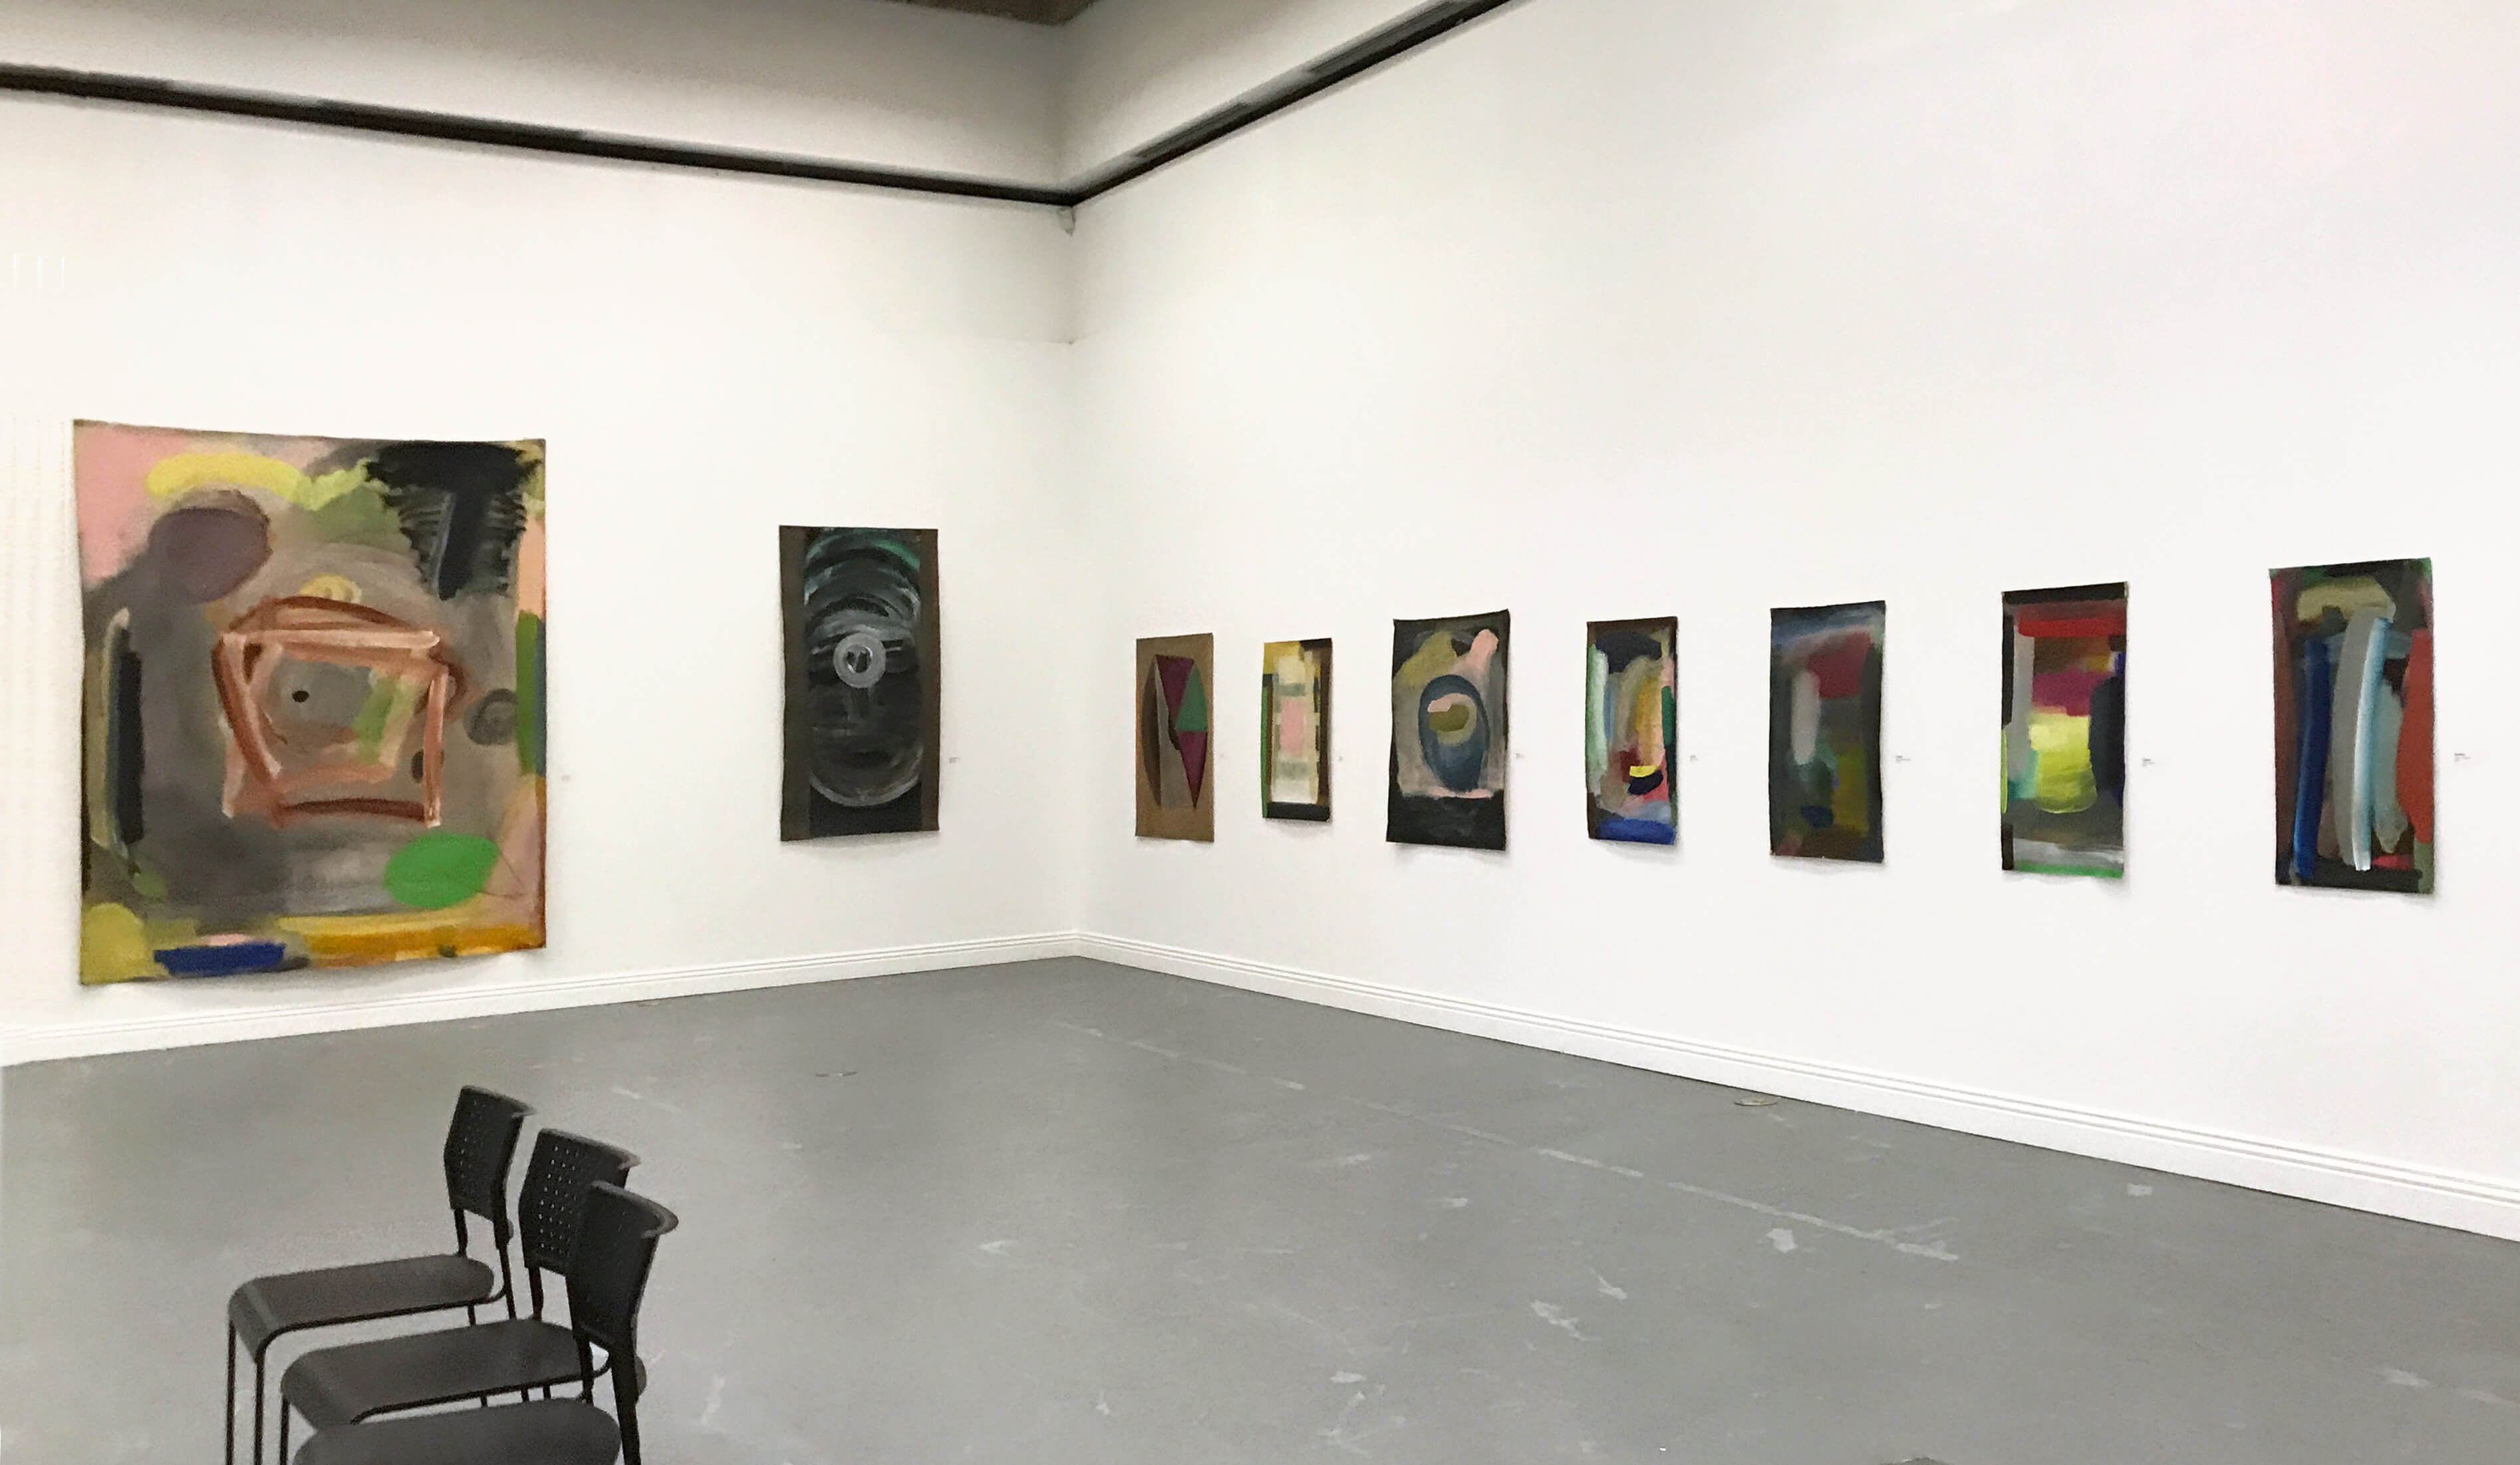 Installation view, Keisho Okayama: Selected Works - Paintings from 1995-2012, all acrylic on canvas.